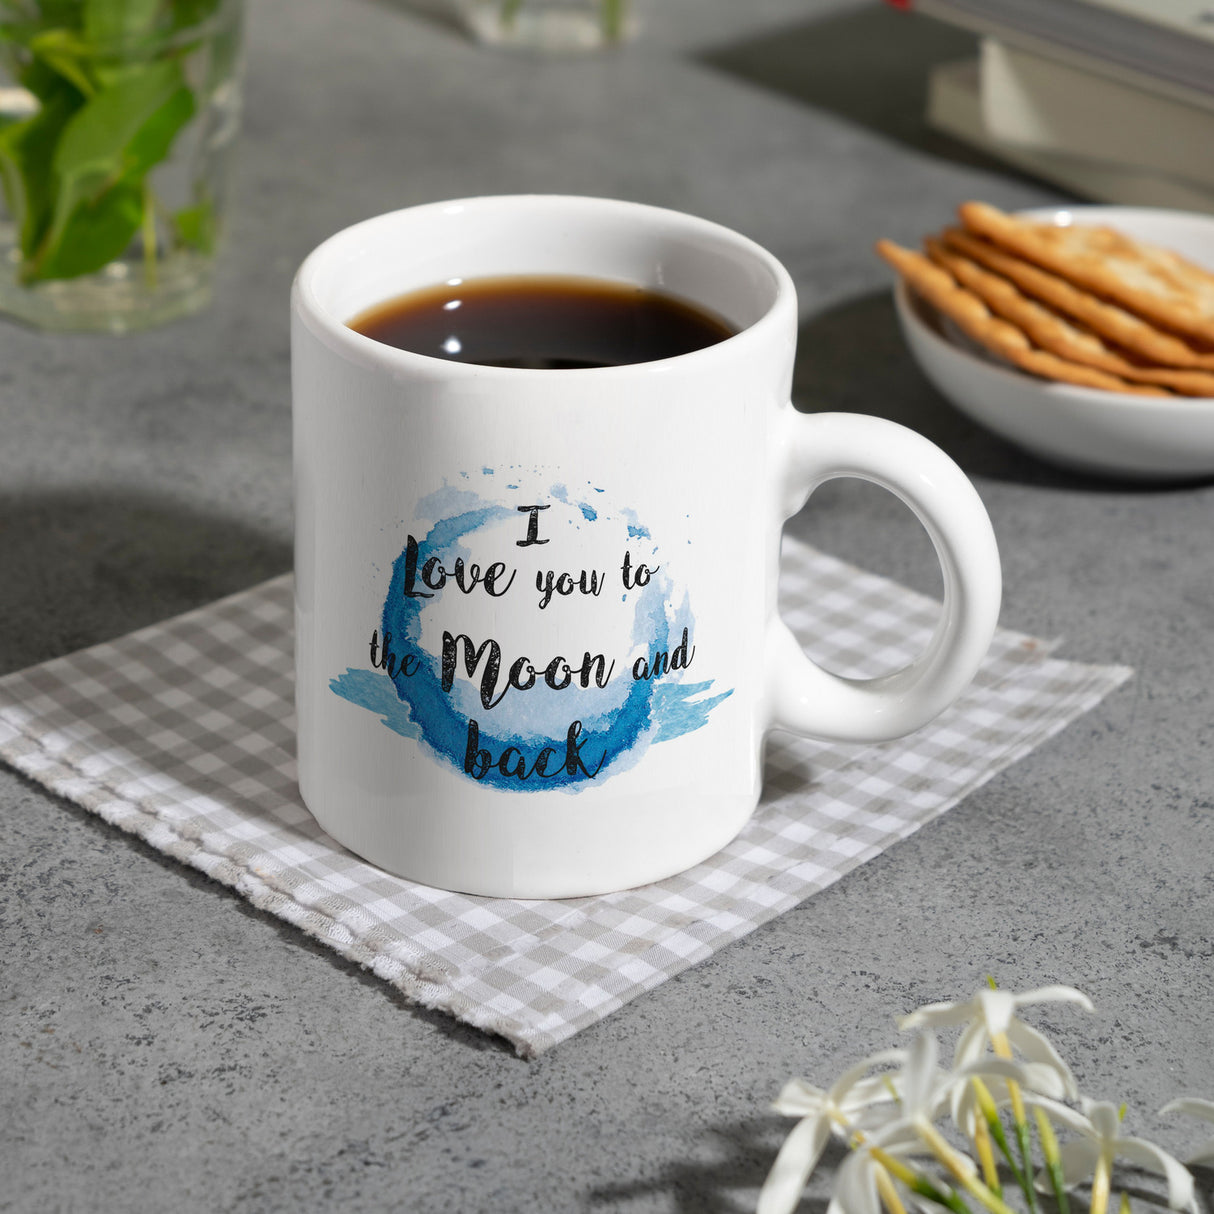 I love you to the Moon and back Valentinstag Kaffeebecher